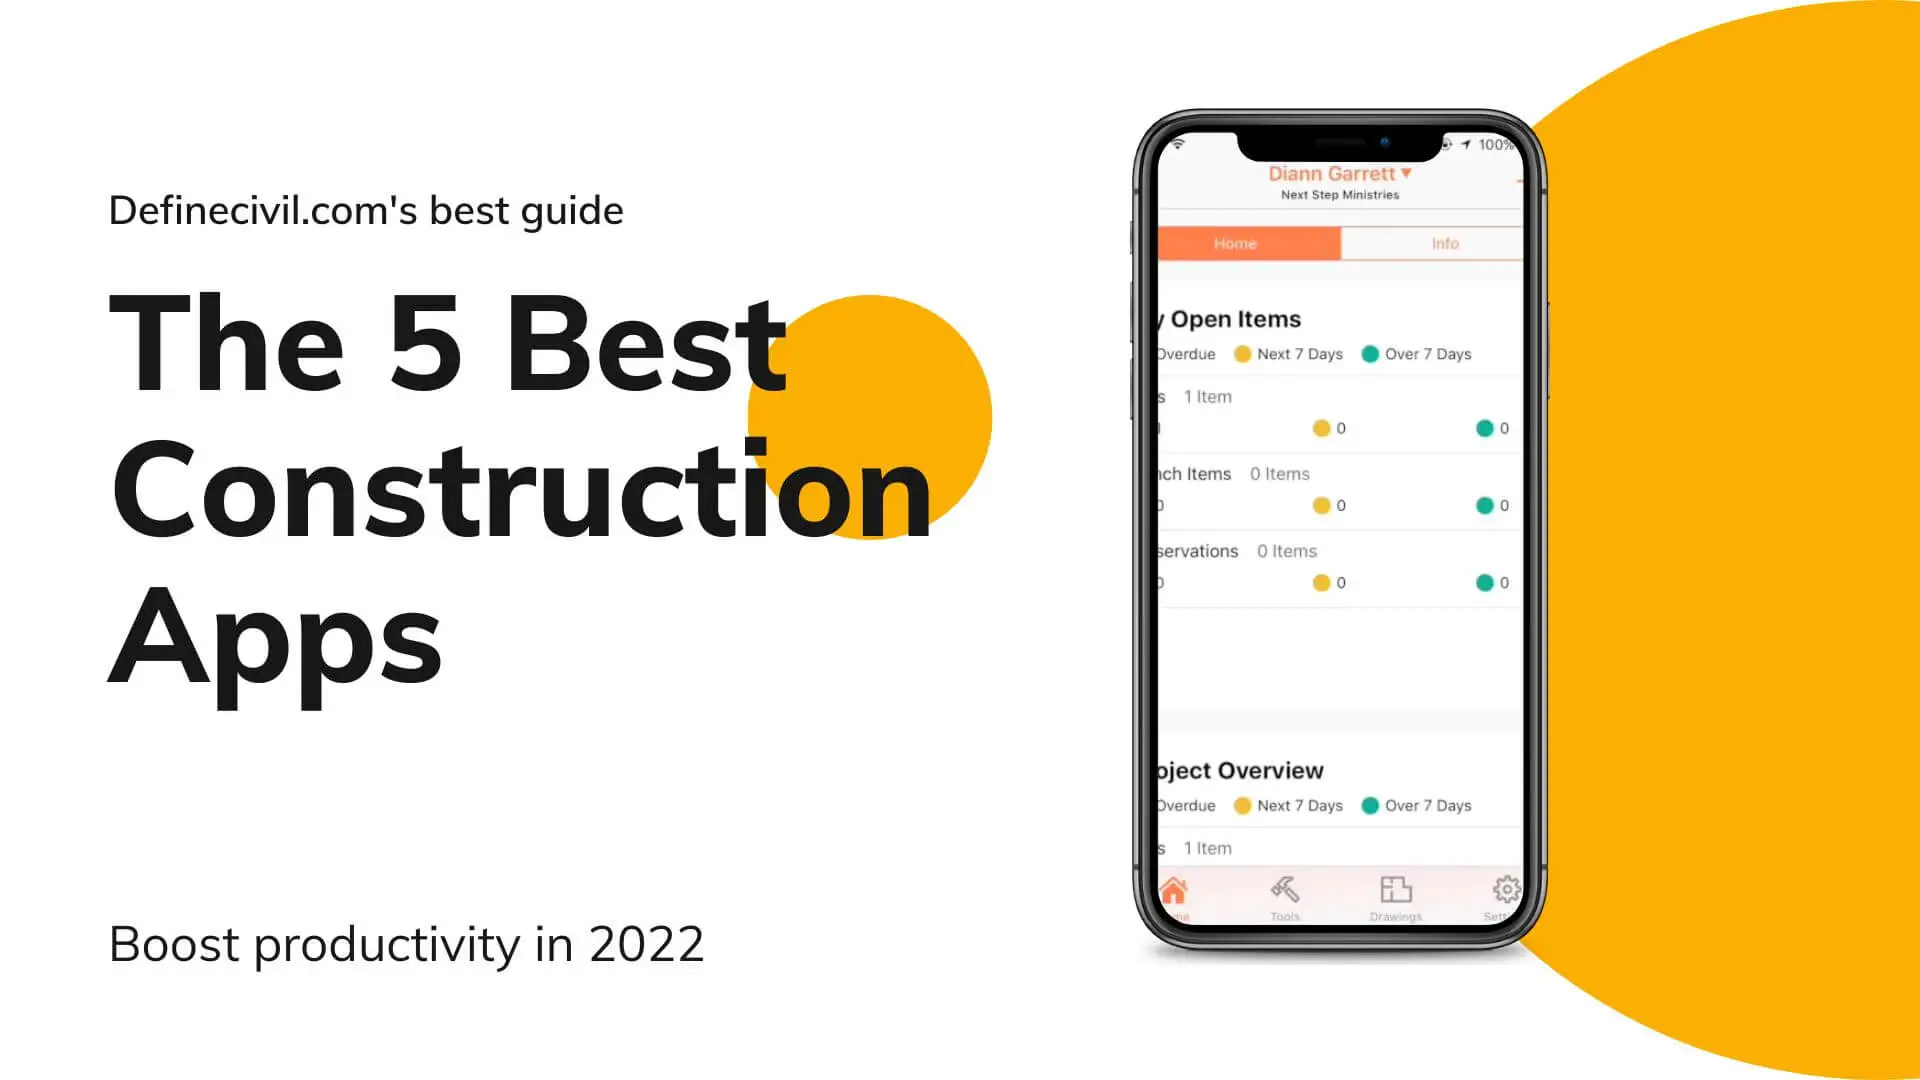 The 5 Best Construction Apps to Boost Productivity in 2022